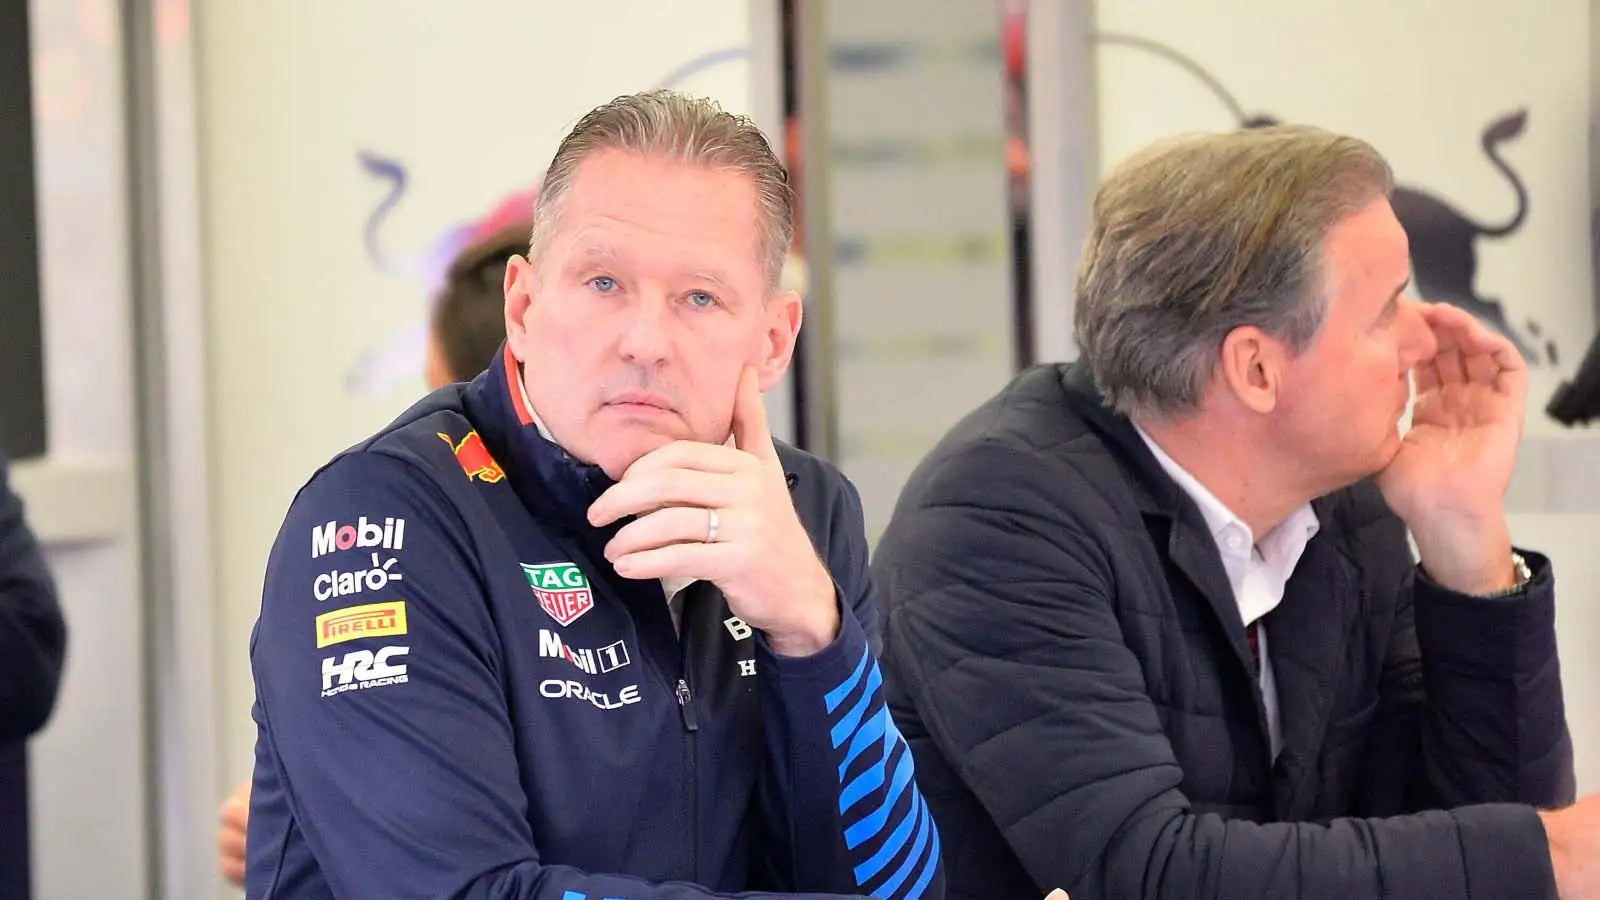 The truth behind Jos Verstappen’s planned non-appearance at the Saudi Arabian Grand Prix